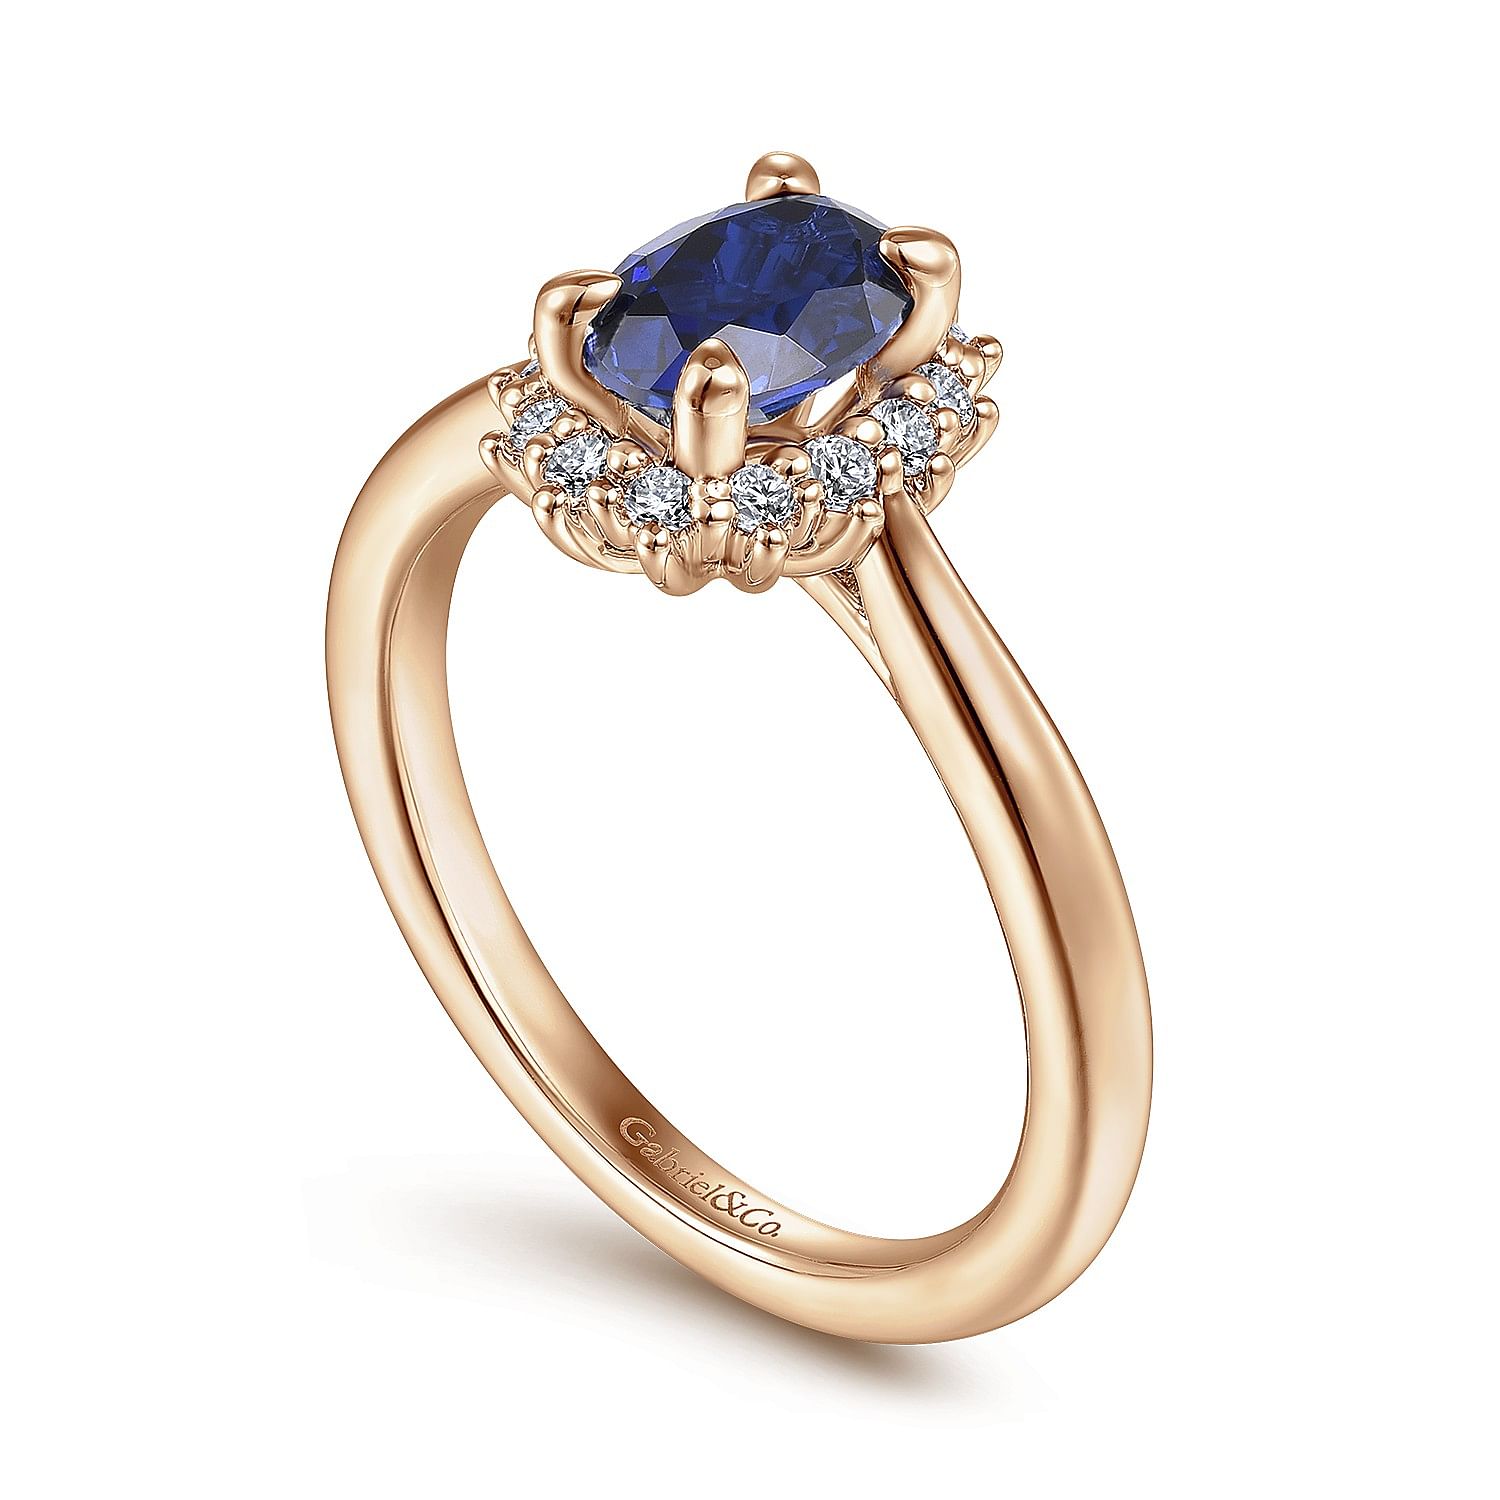 Fergie - 14K Rose Gold Oval Halo Diamond and Sapphire Engagement Ring - 0.17 ct - Shot 3